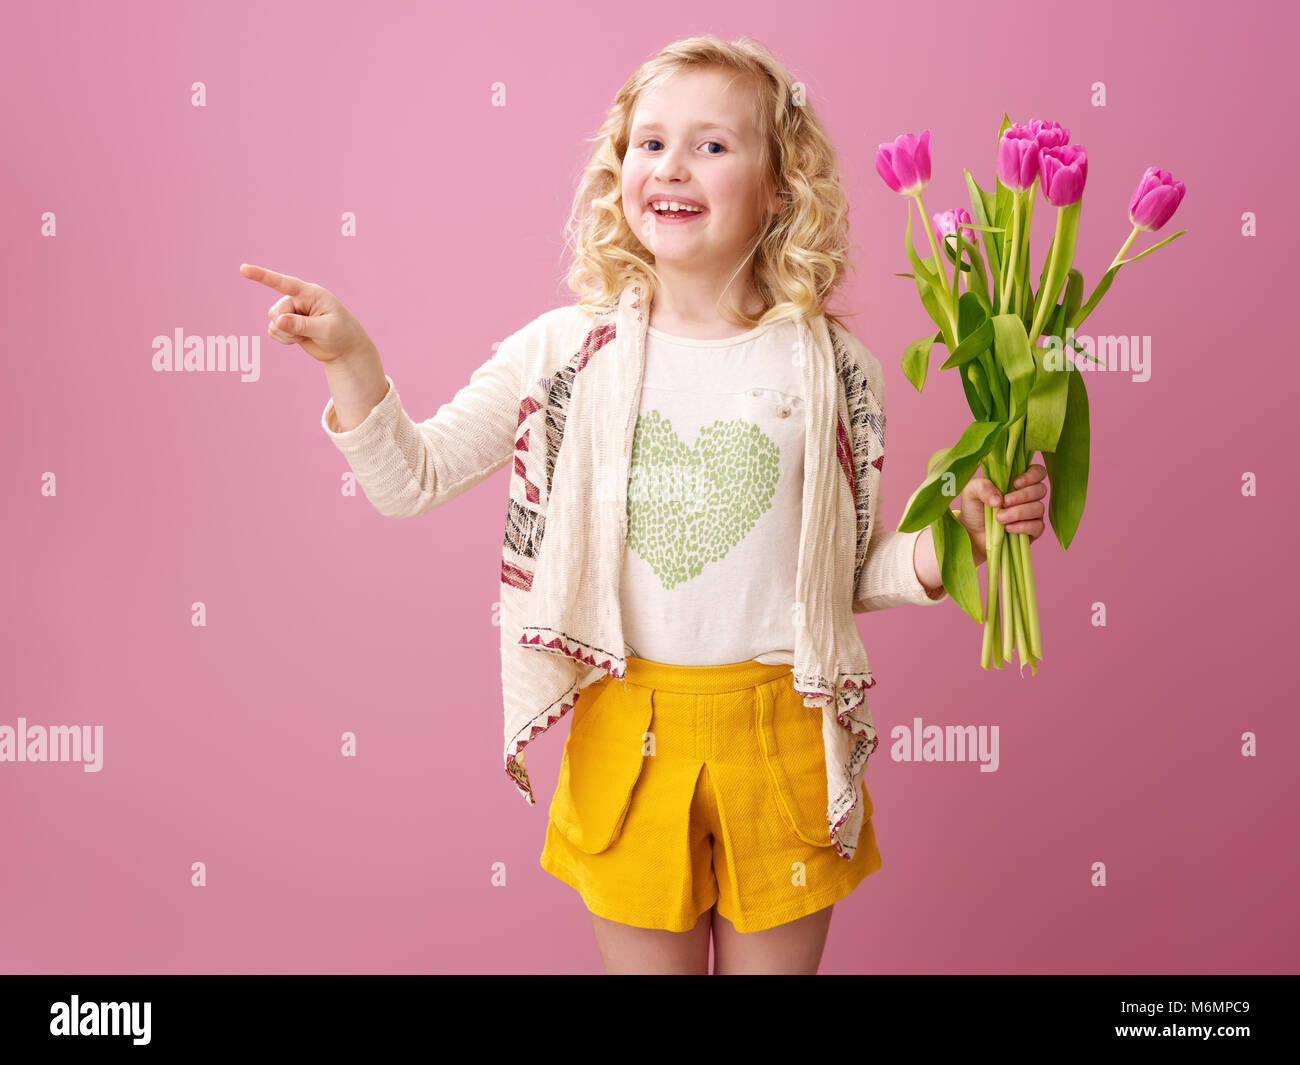 5. Wavy Blonde Hair Girl Stock Photos, Pictures & Royalty-Free Images - iStock - wide 9